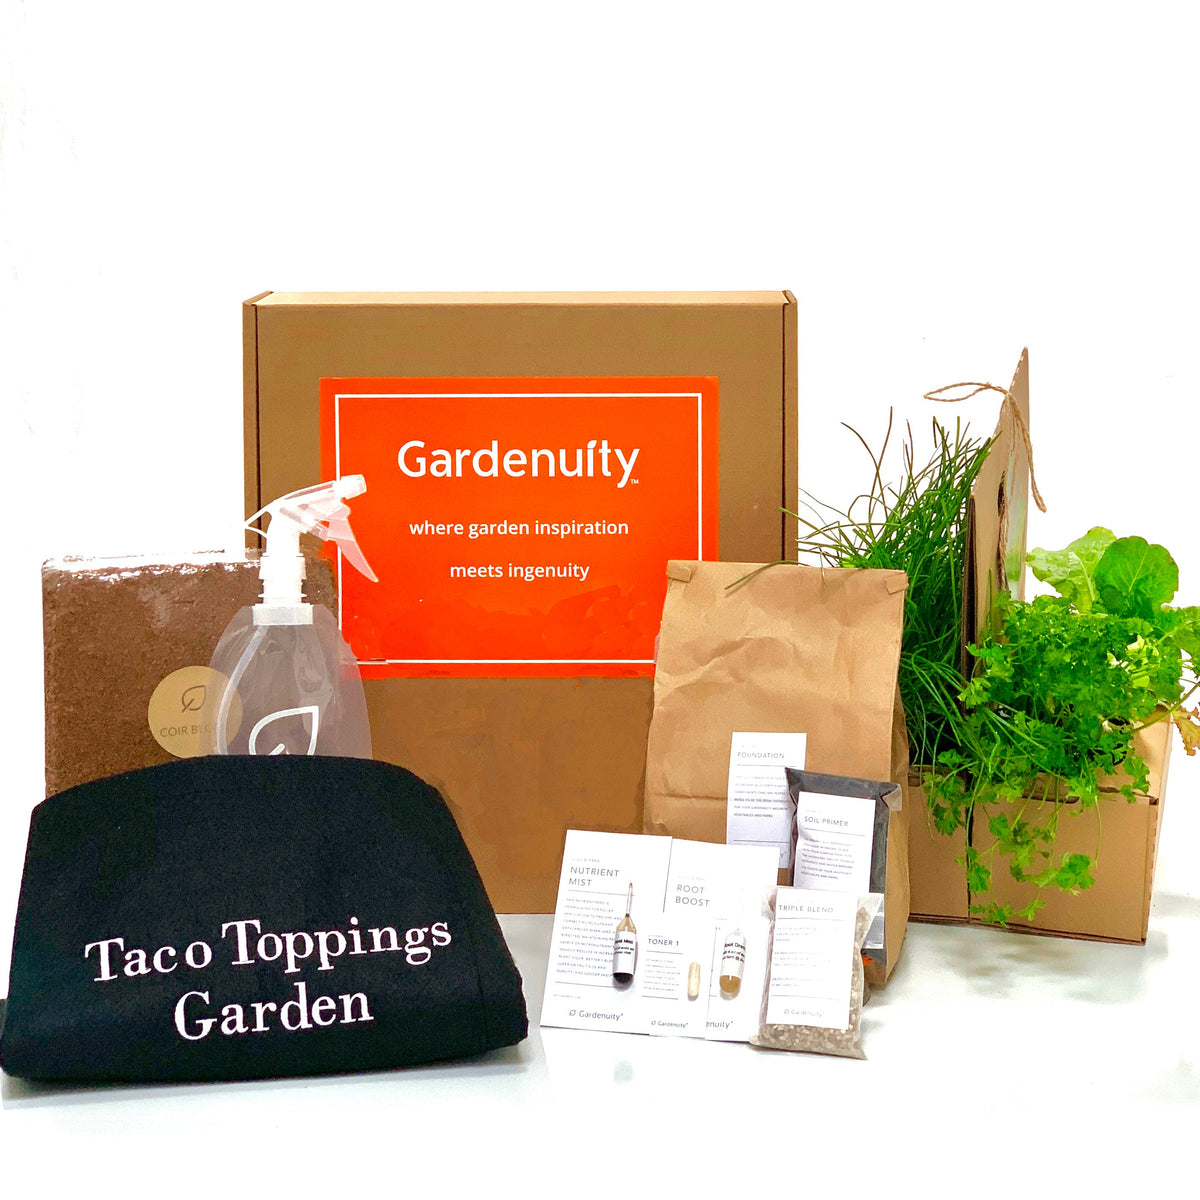 Taco Toppings Garden Kit with tomato plant & herbs